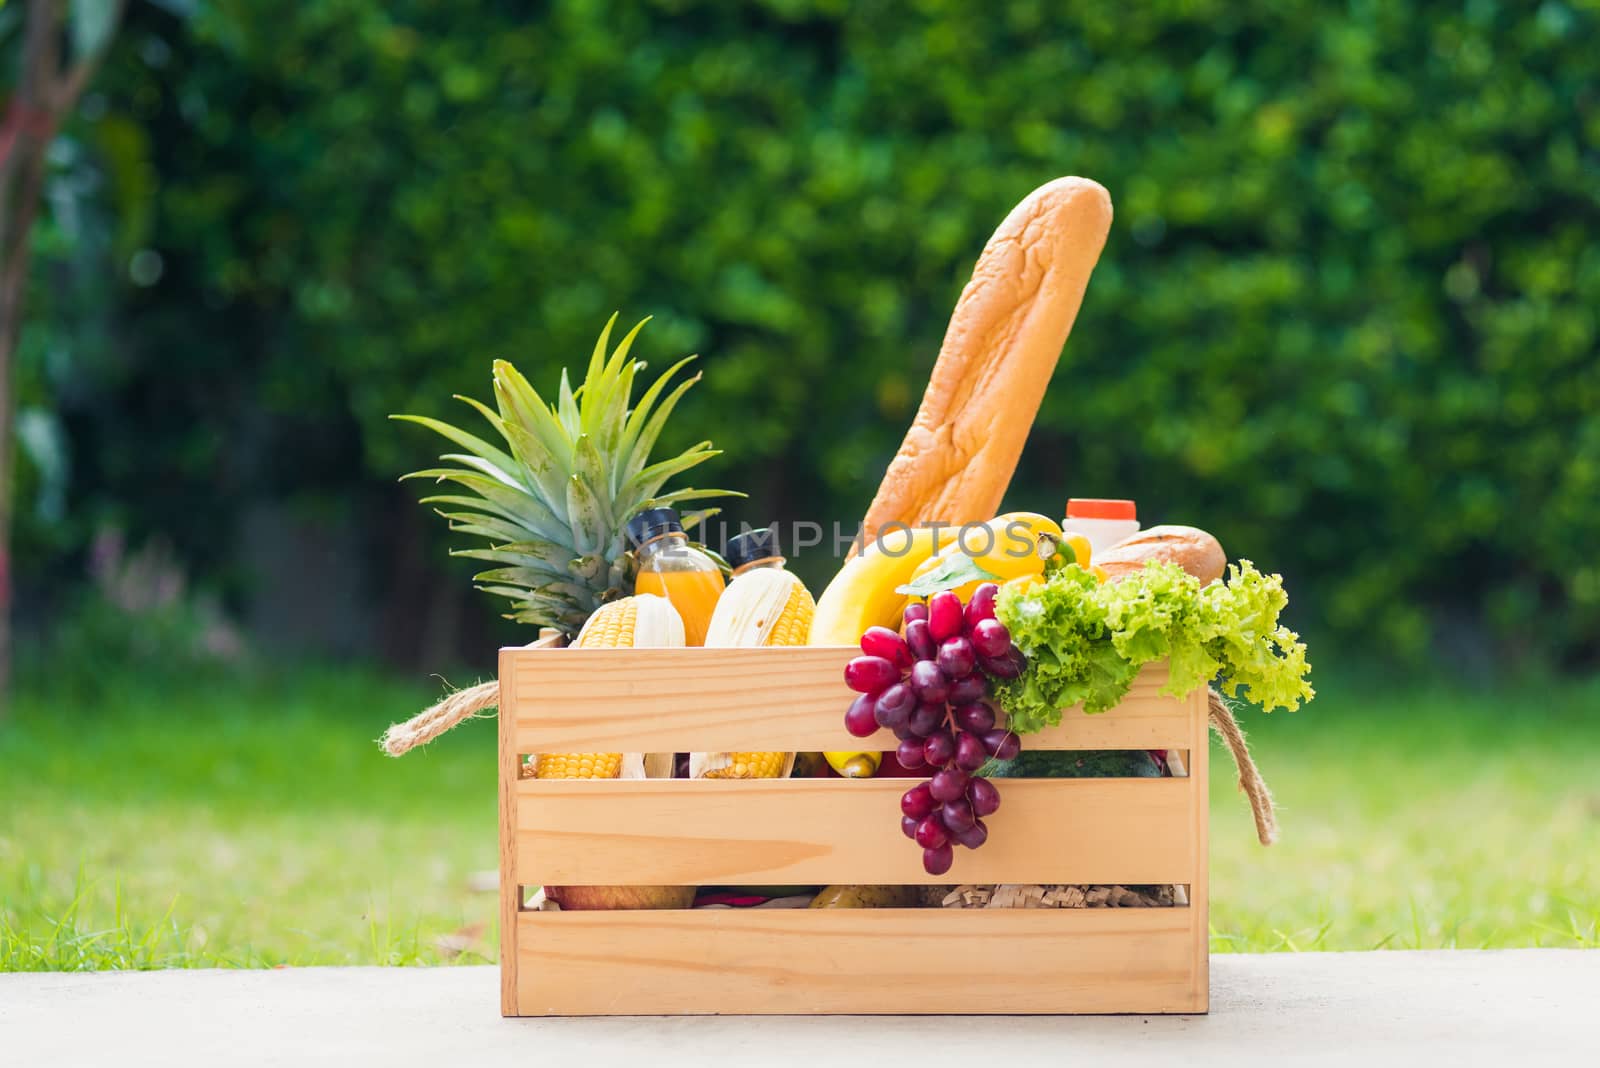 Full fresh vegetables and fruits in crate wood box, harvest organic food on the garden place of green leaves color background for copy space, Eat healthy concept